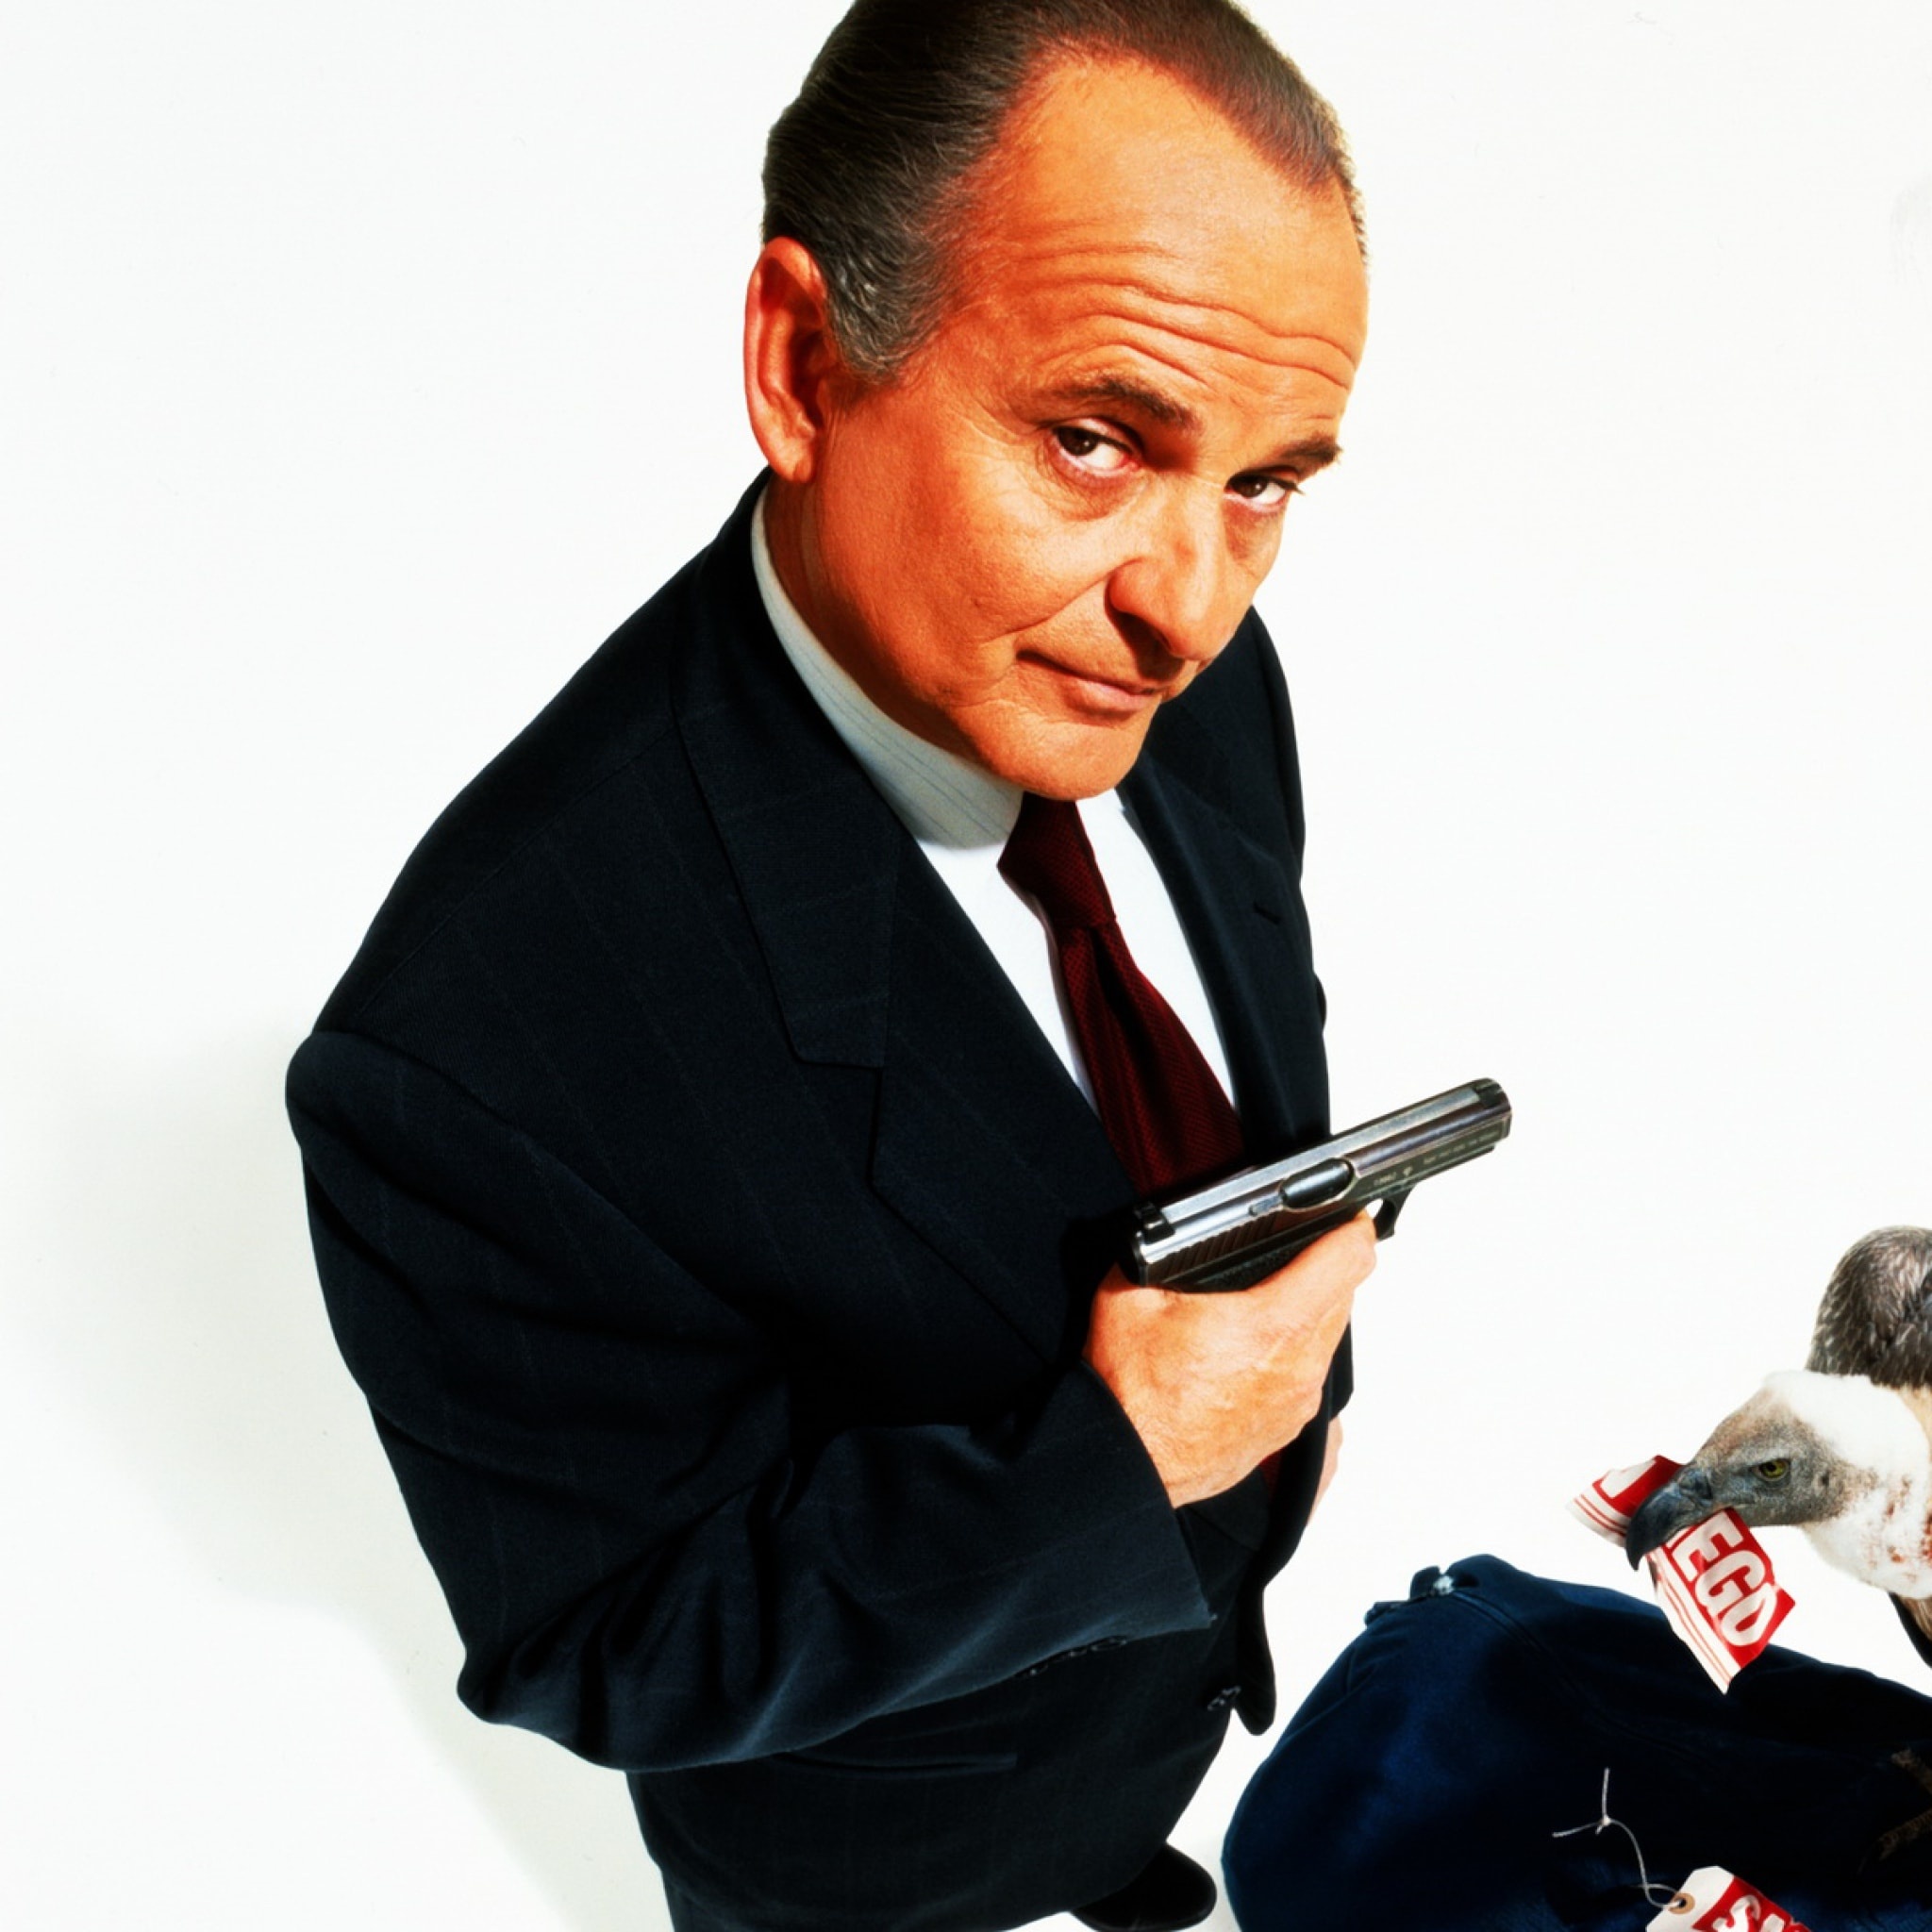 Joe Pesci, Top-rated wallpapers, Free backgrounds, High-quality images, 2050x2050 HD Handy